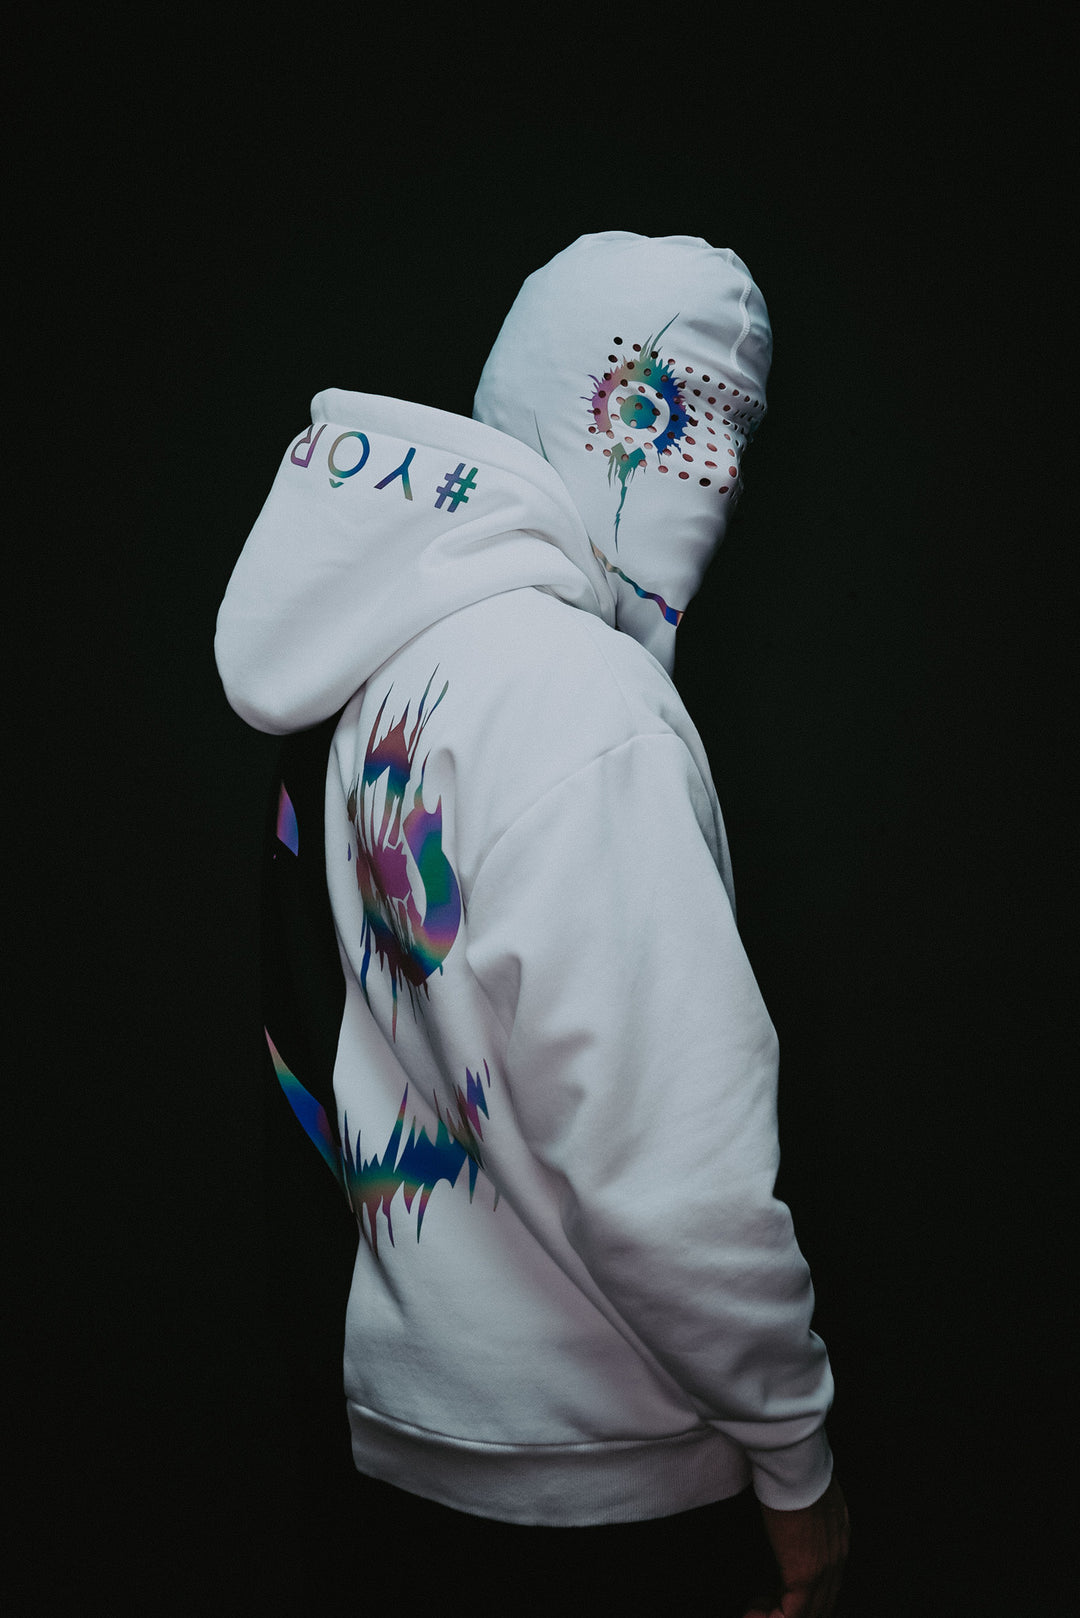 The 3M Reflective Hoodie